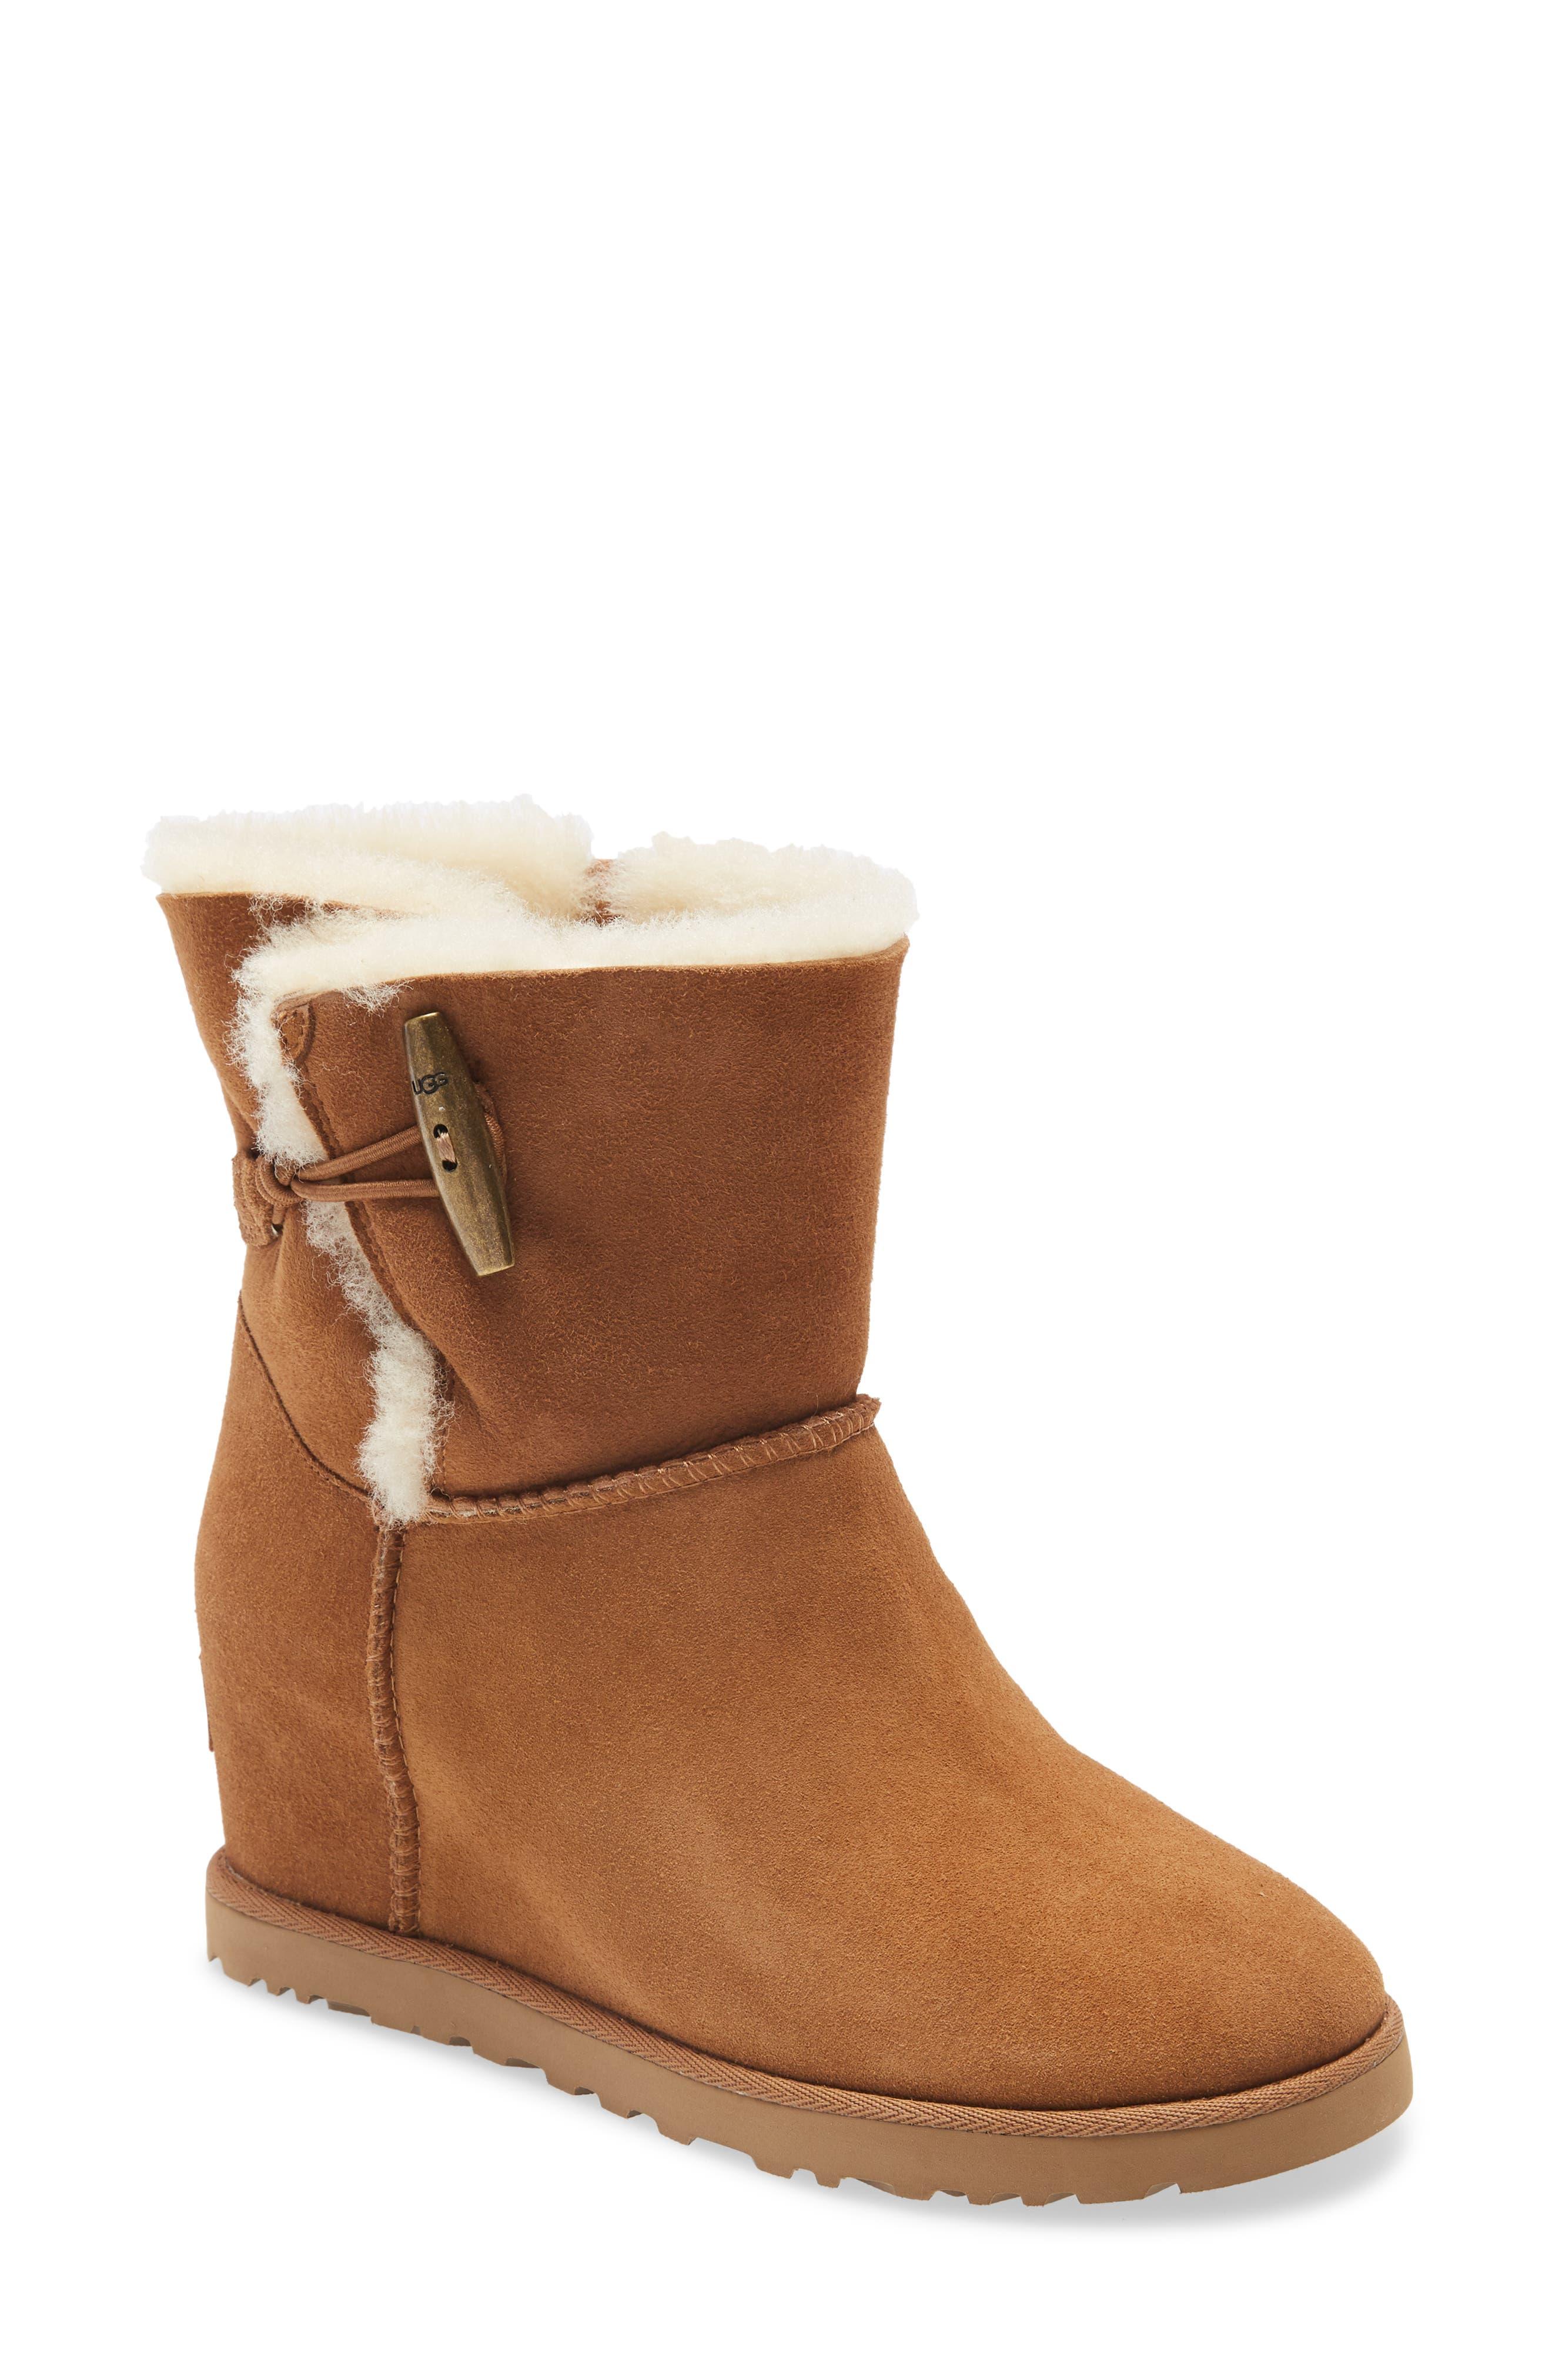 UGG Wool UGG Classic Femme Toggle Wedge Boot in Chestnut Suede (Brown) -  Lyst